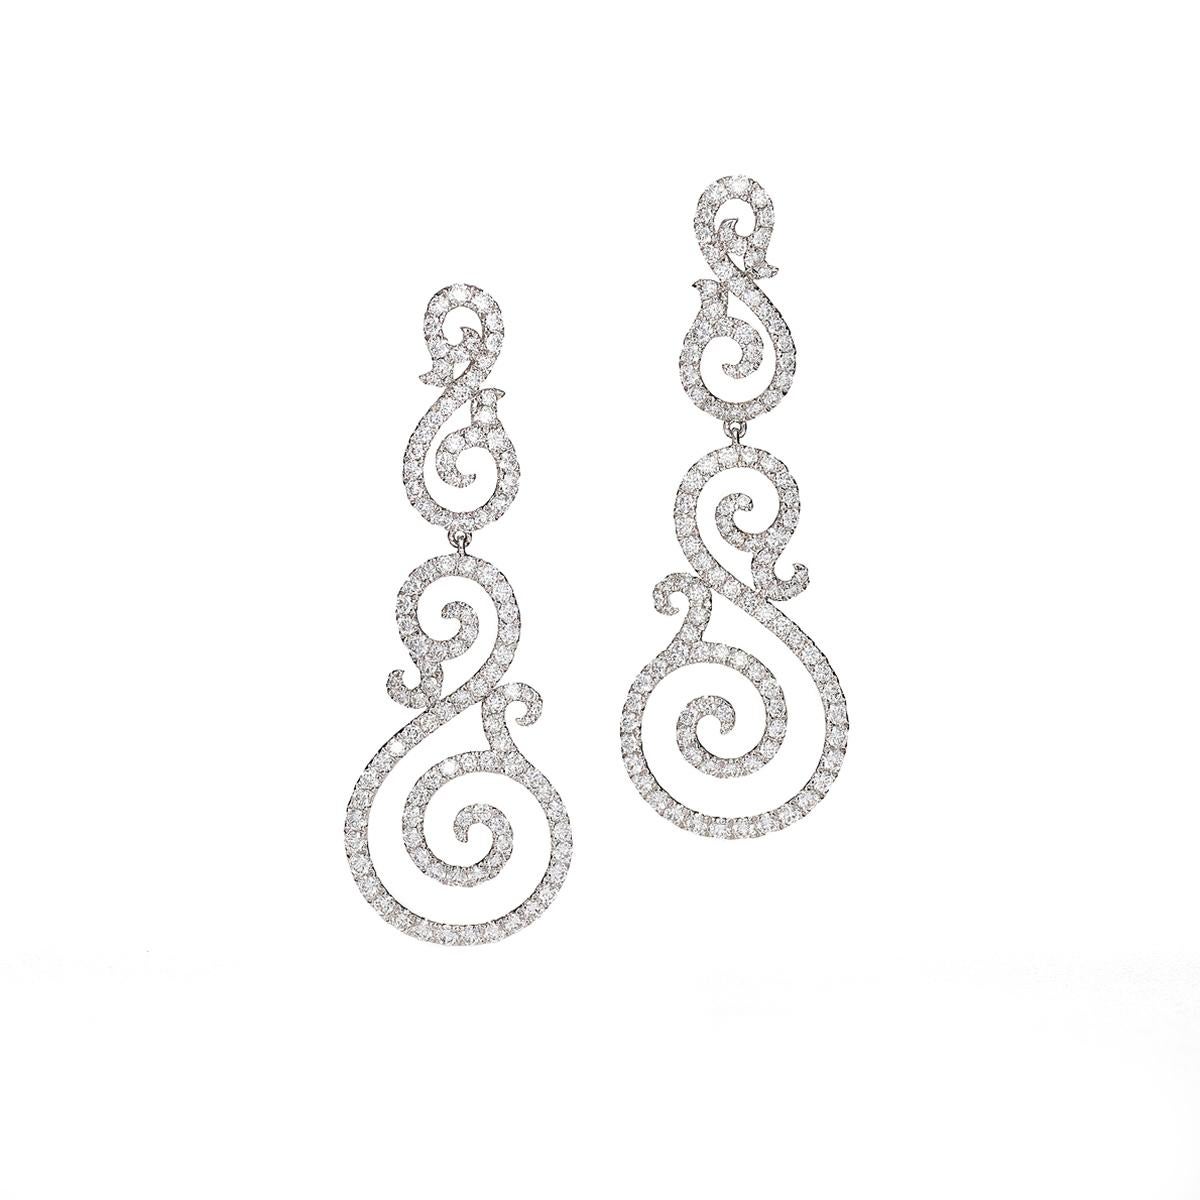 Earrings in 18kt white gold set with 222 diamonds 3.76 cts